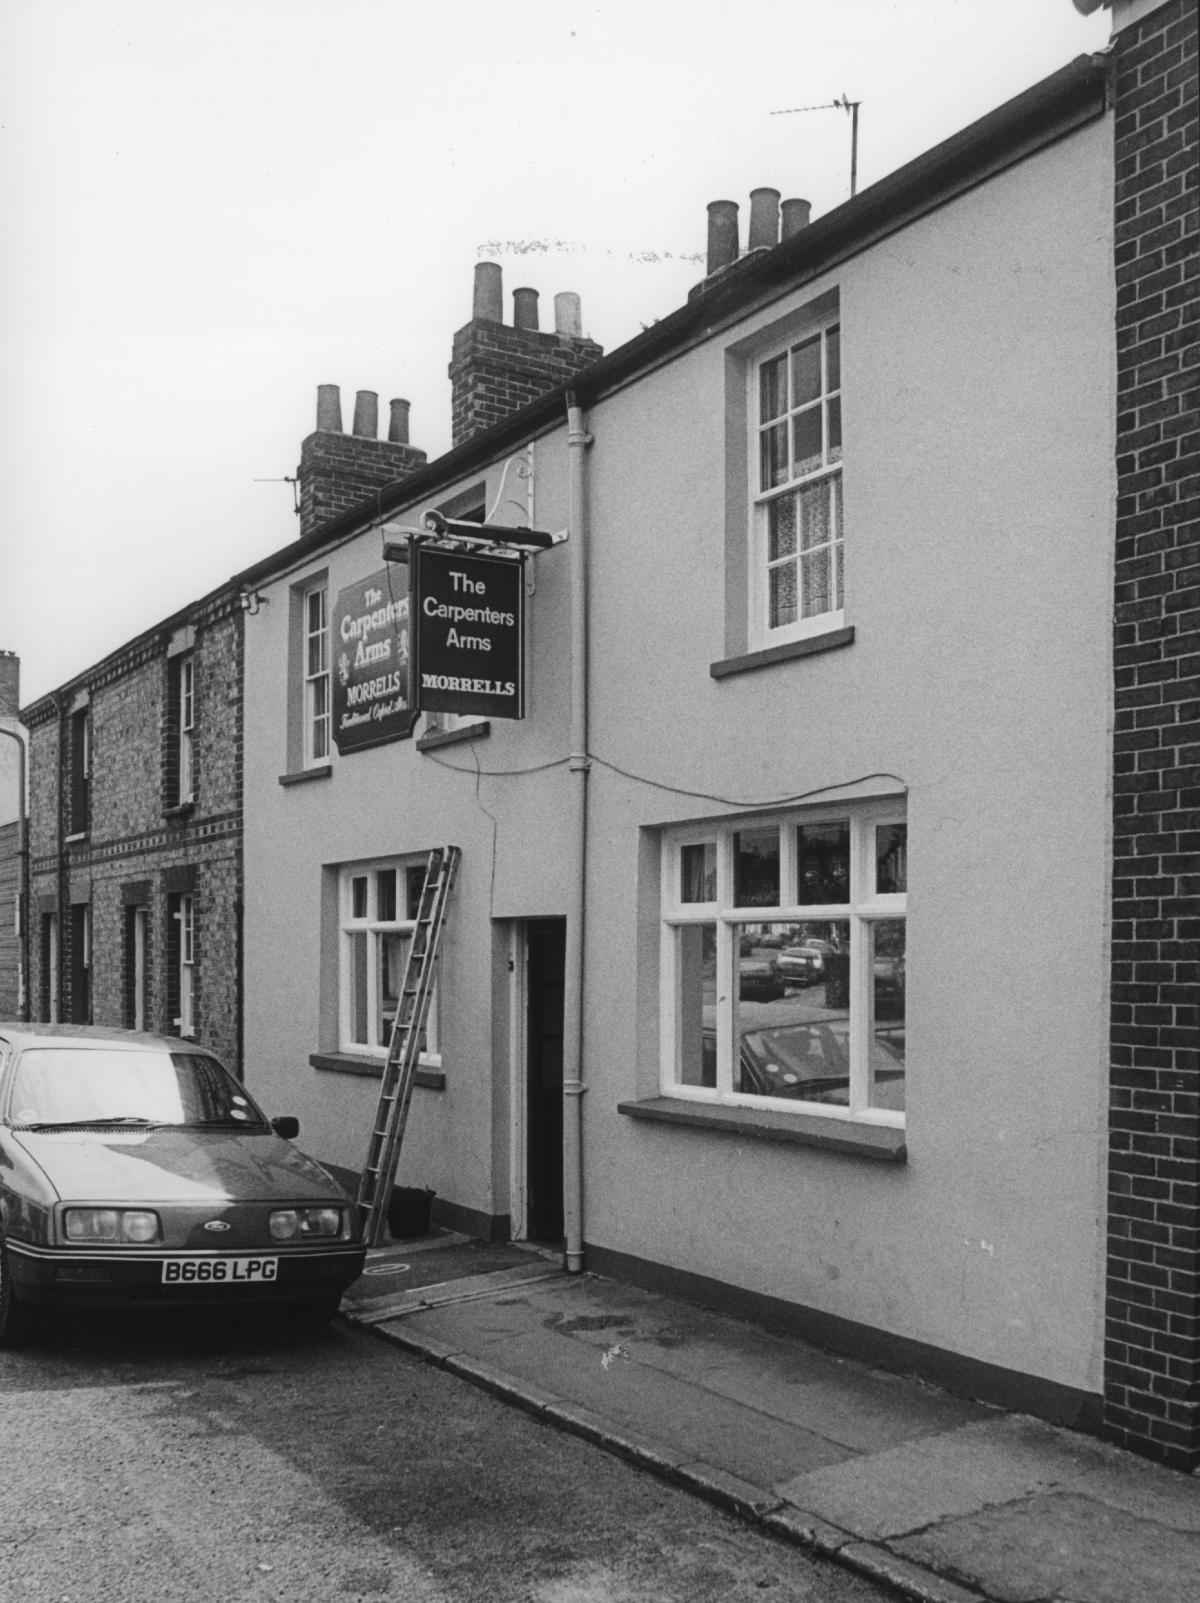 Another Carpenters Arms, this time in Nelson Street.